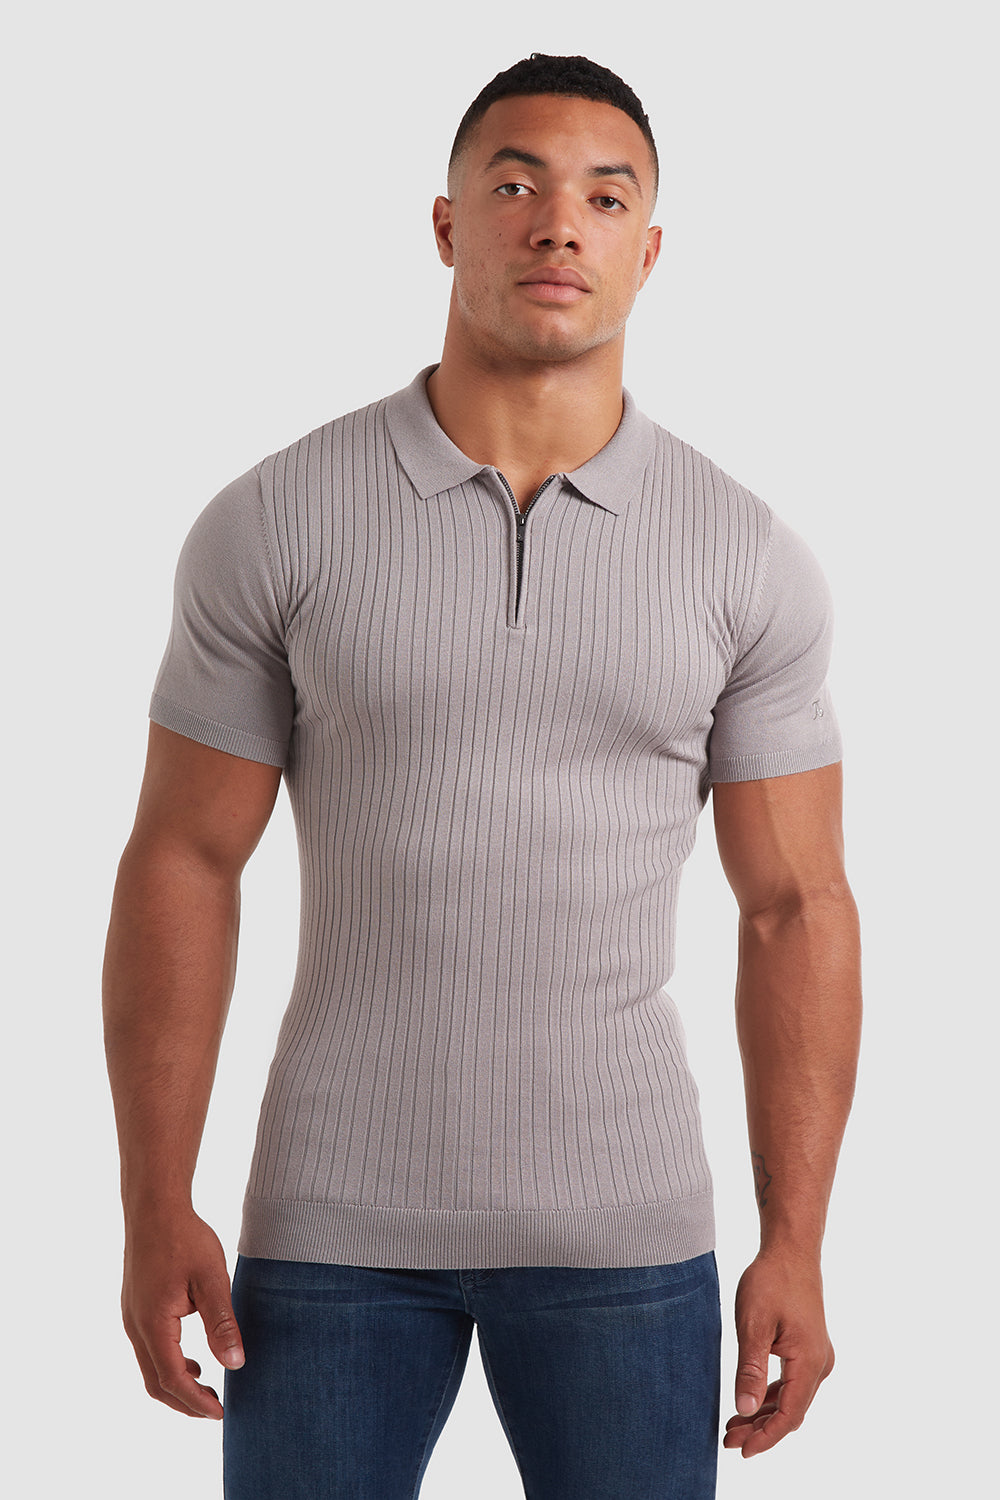 Ribbed Zip Neck Polo in Smoke Grey - TAILORED ATHLETE - ROW